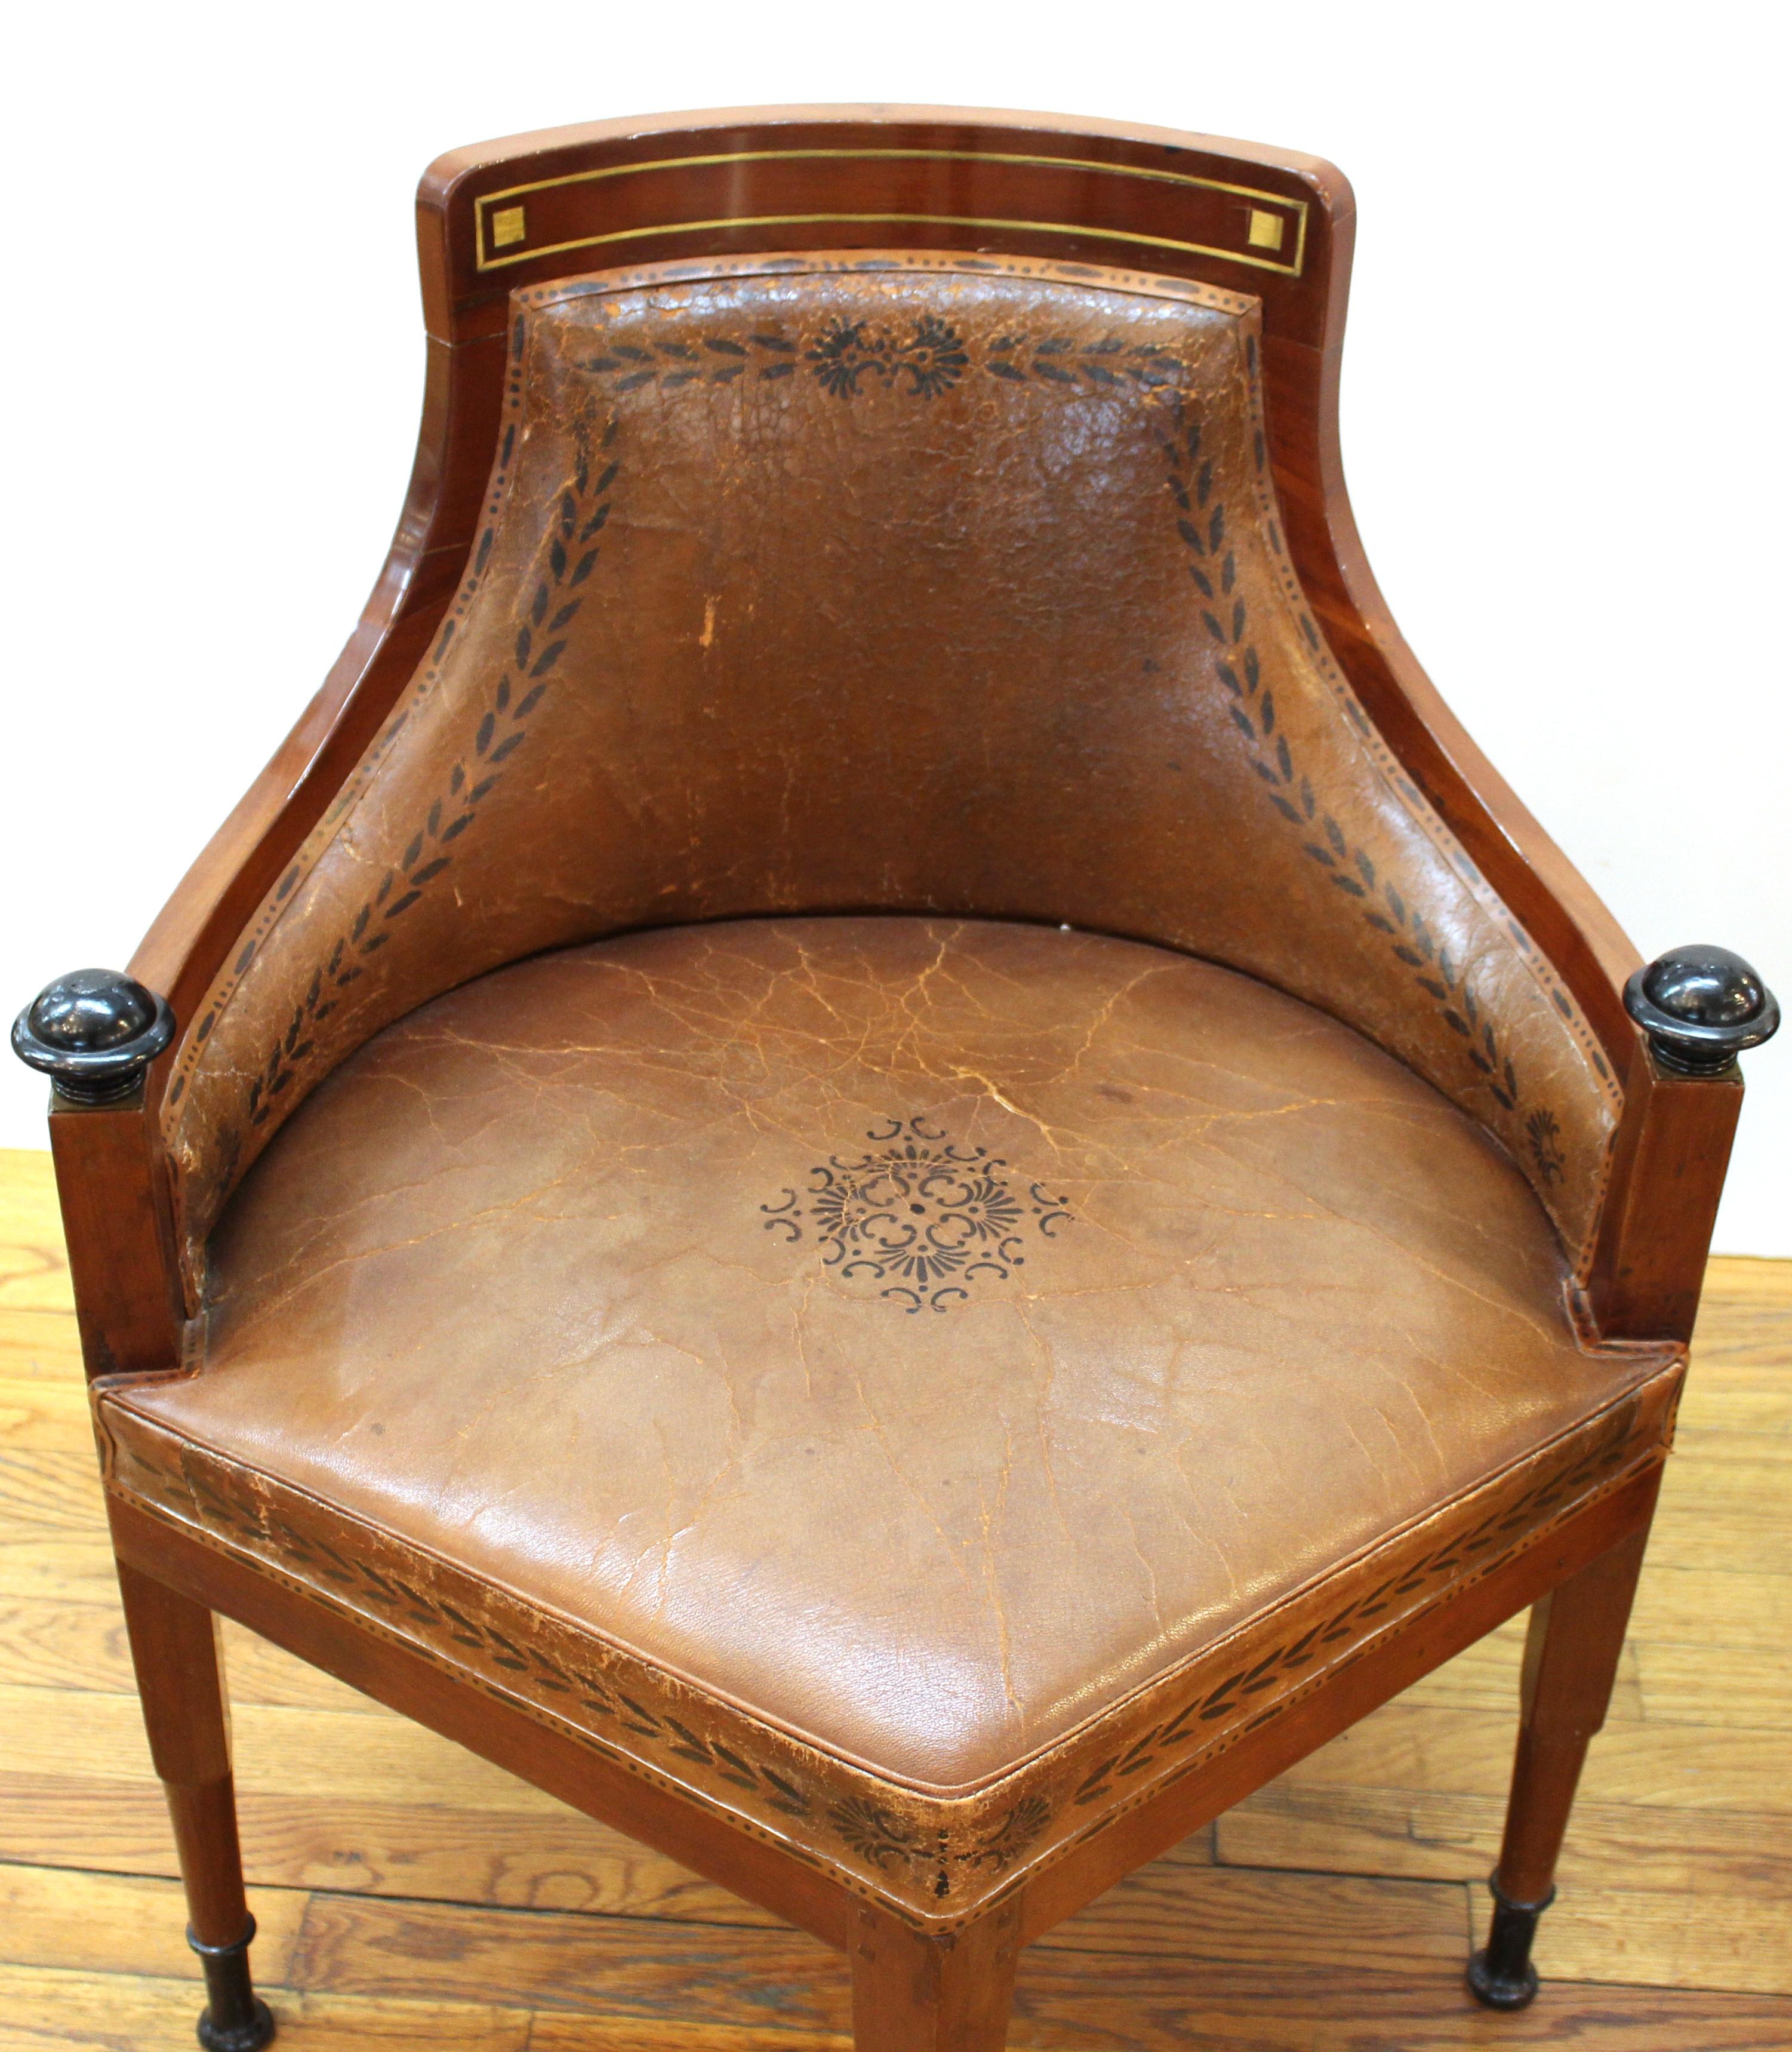 19th Century Russian or Baltic Empire Desk or Corner Chairs With Stenciled Leather Seats